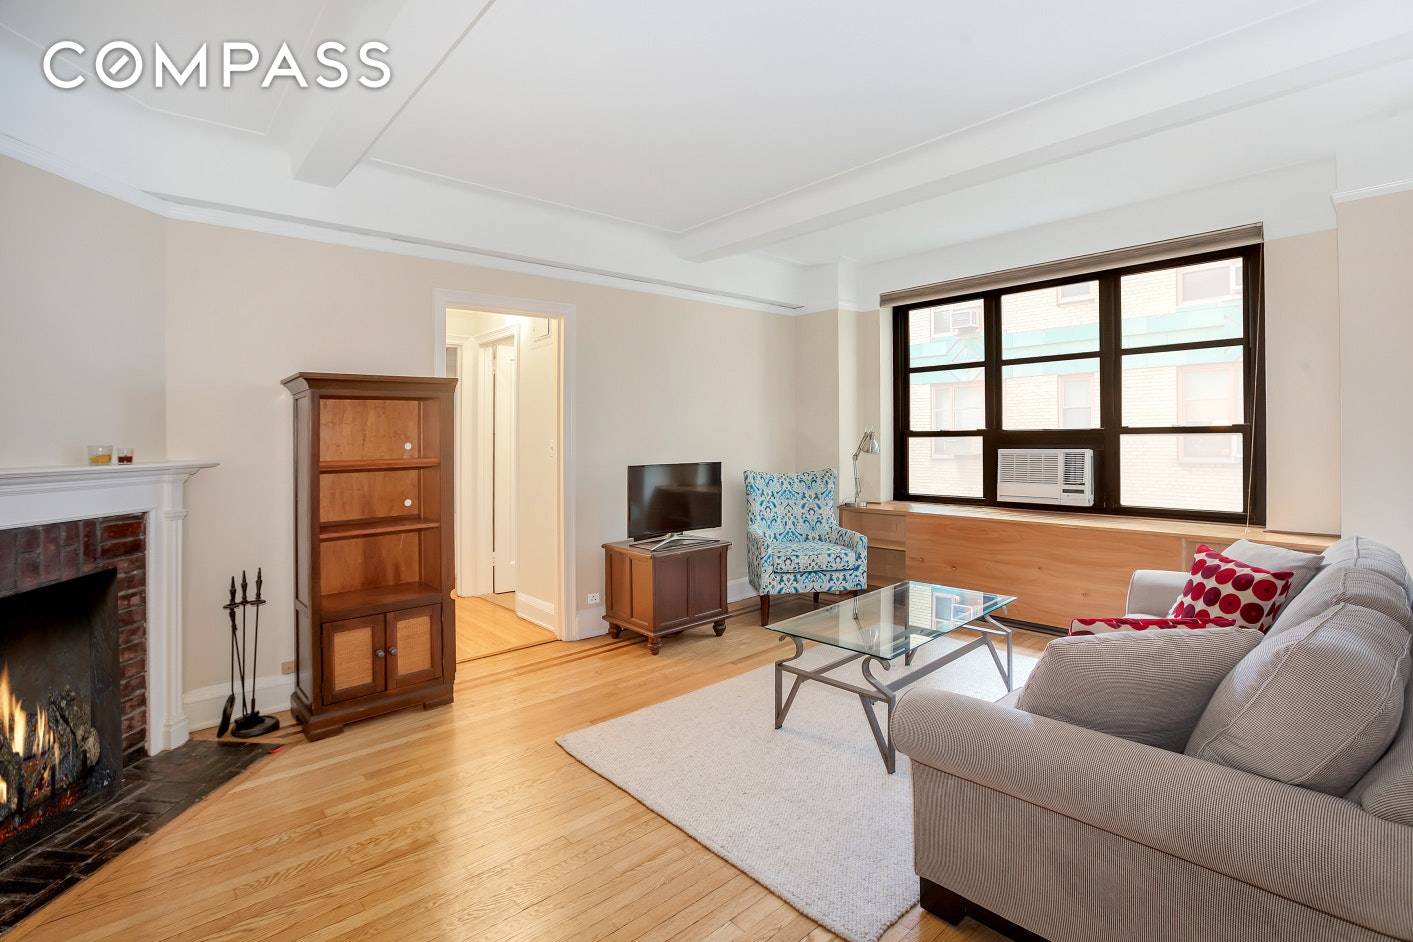 A charming one bedroom with a wood burning fireplace in this elegant and highly sought after Art Deco coop on East 22nd Street, a block and a half from Gramercy ...